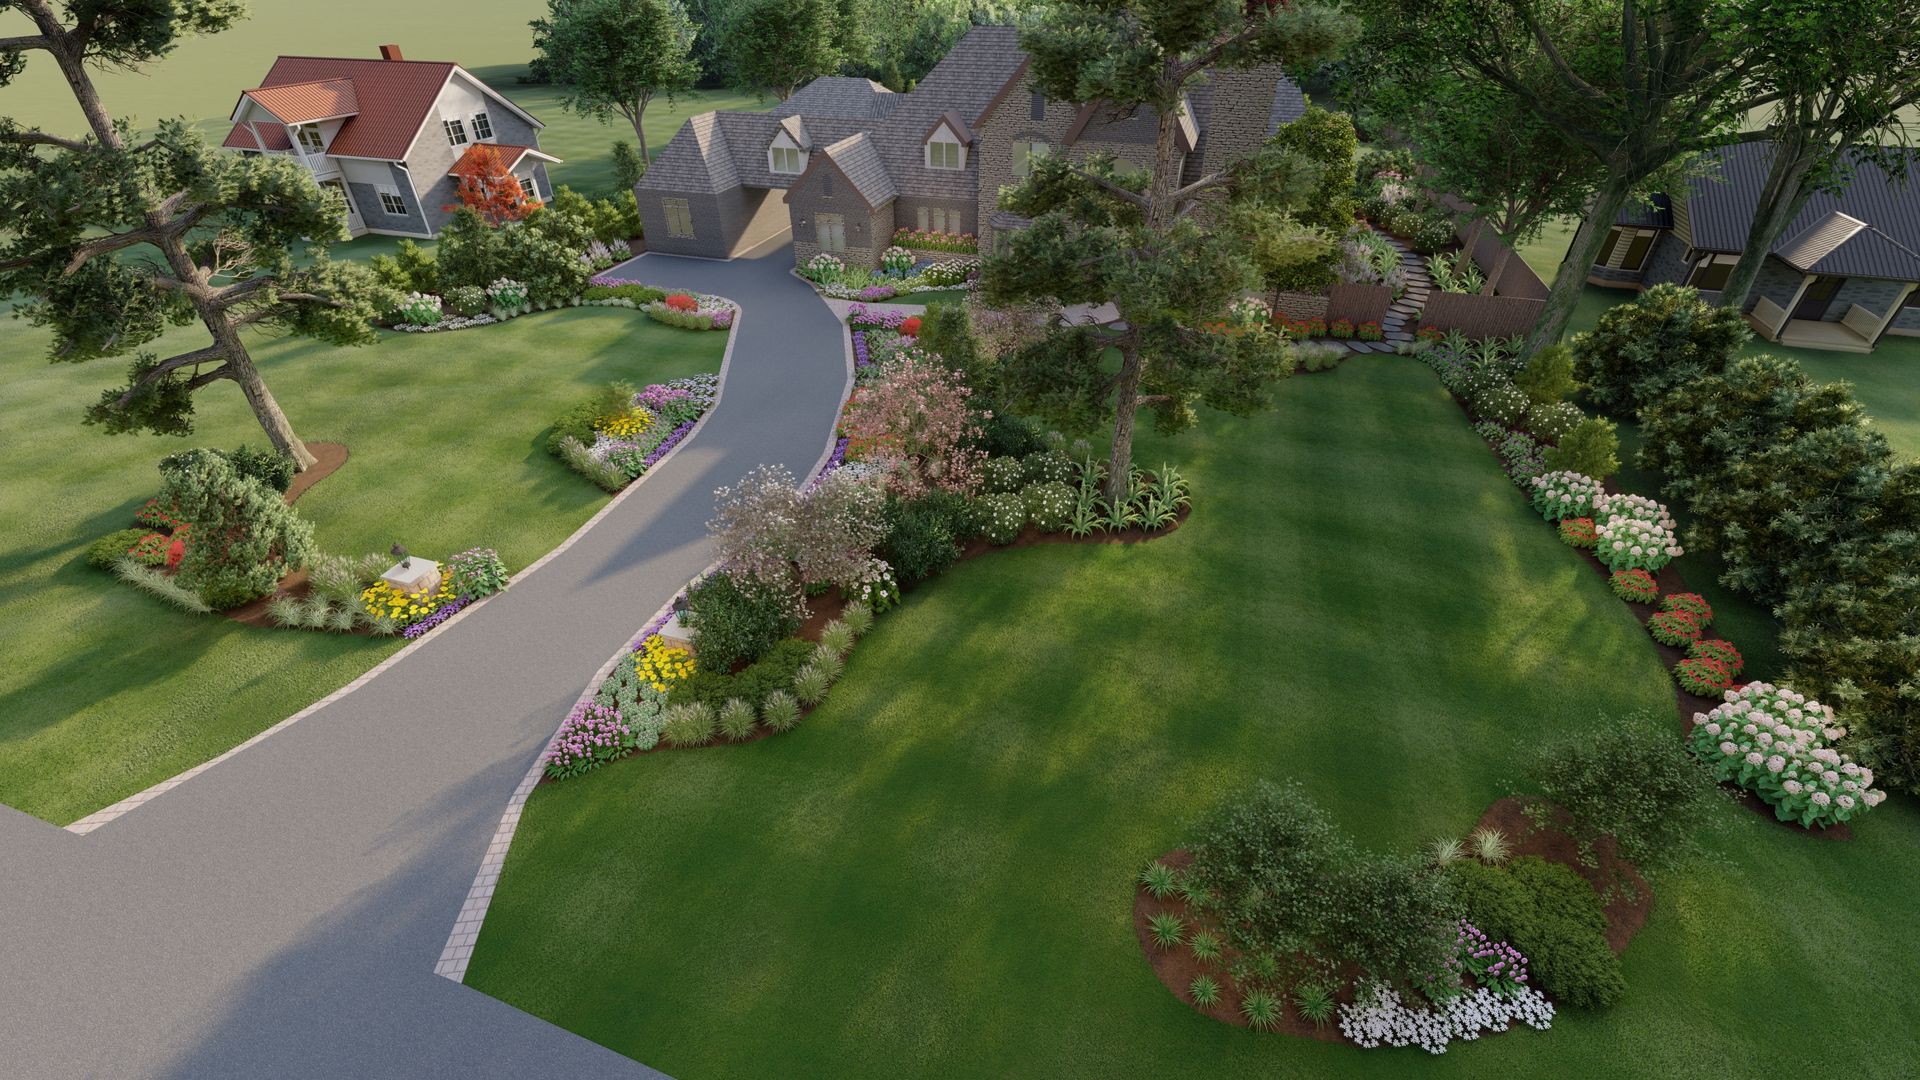 front yard landscaping ideas with a long driveway surrounded by flowers, shrubs and trees